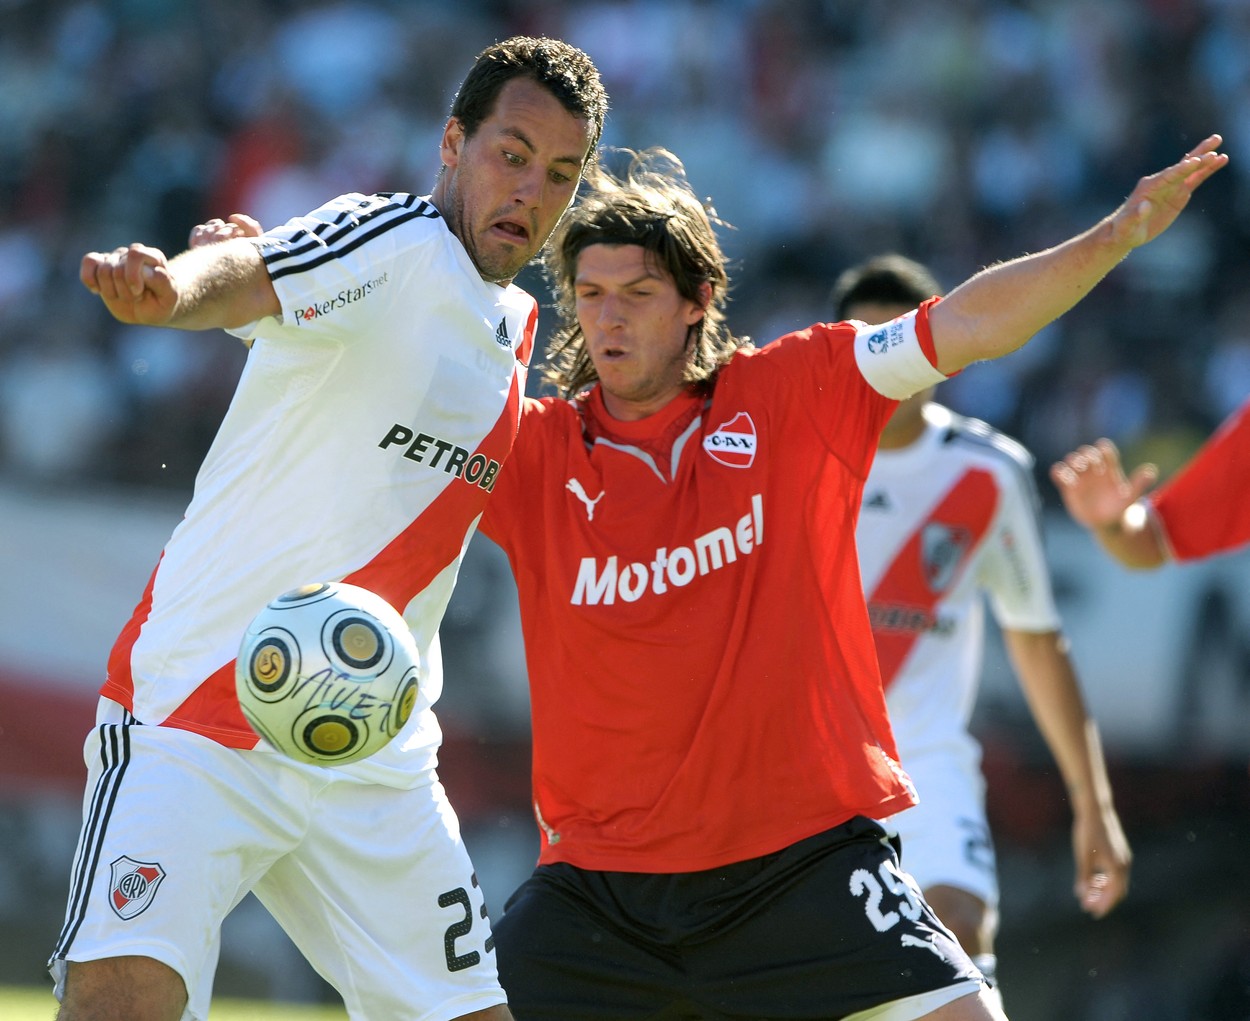 River Plate's footballer Cristian Fabbiani (L) vies for the ball with Independiente's Federico Mancuello  during Argentina's first division football match at the Monumental stadium, in Buenos Aires, Argentina, on October 12, 2009. Independiente won 3-1.,Image: 39381232, License: Rights-managed, Restrictions: , Model Release: no